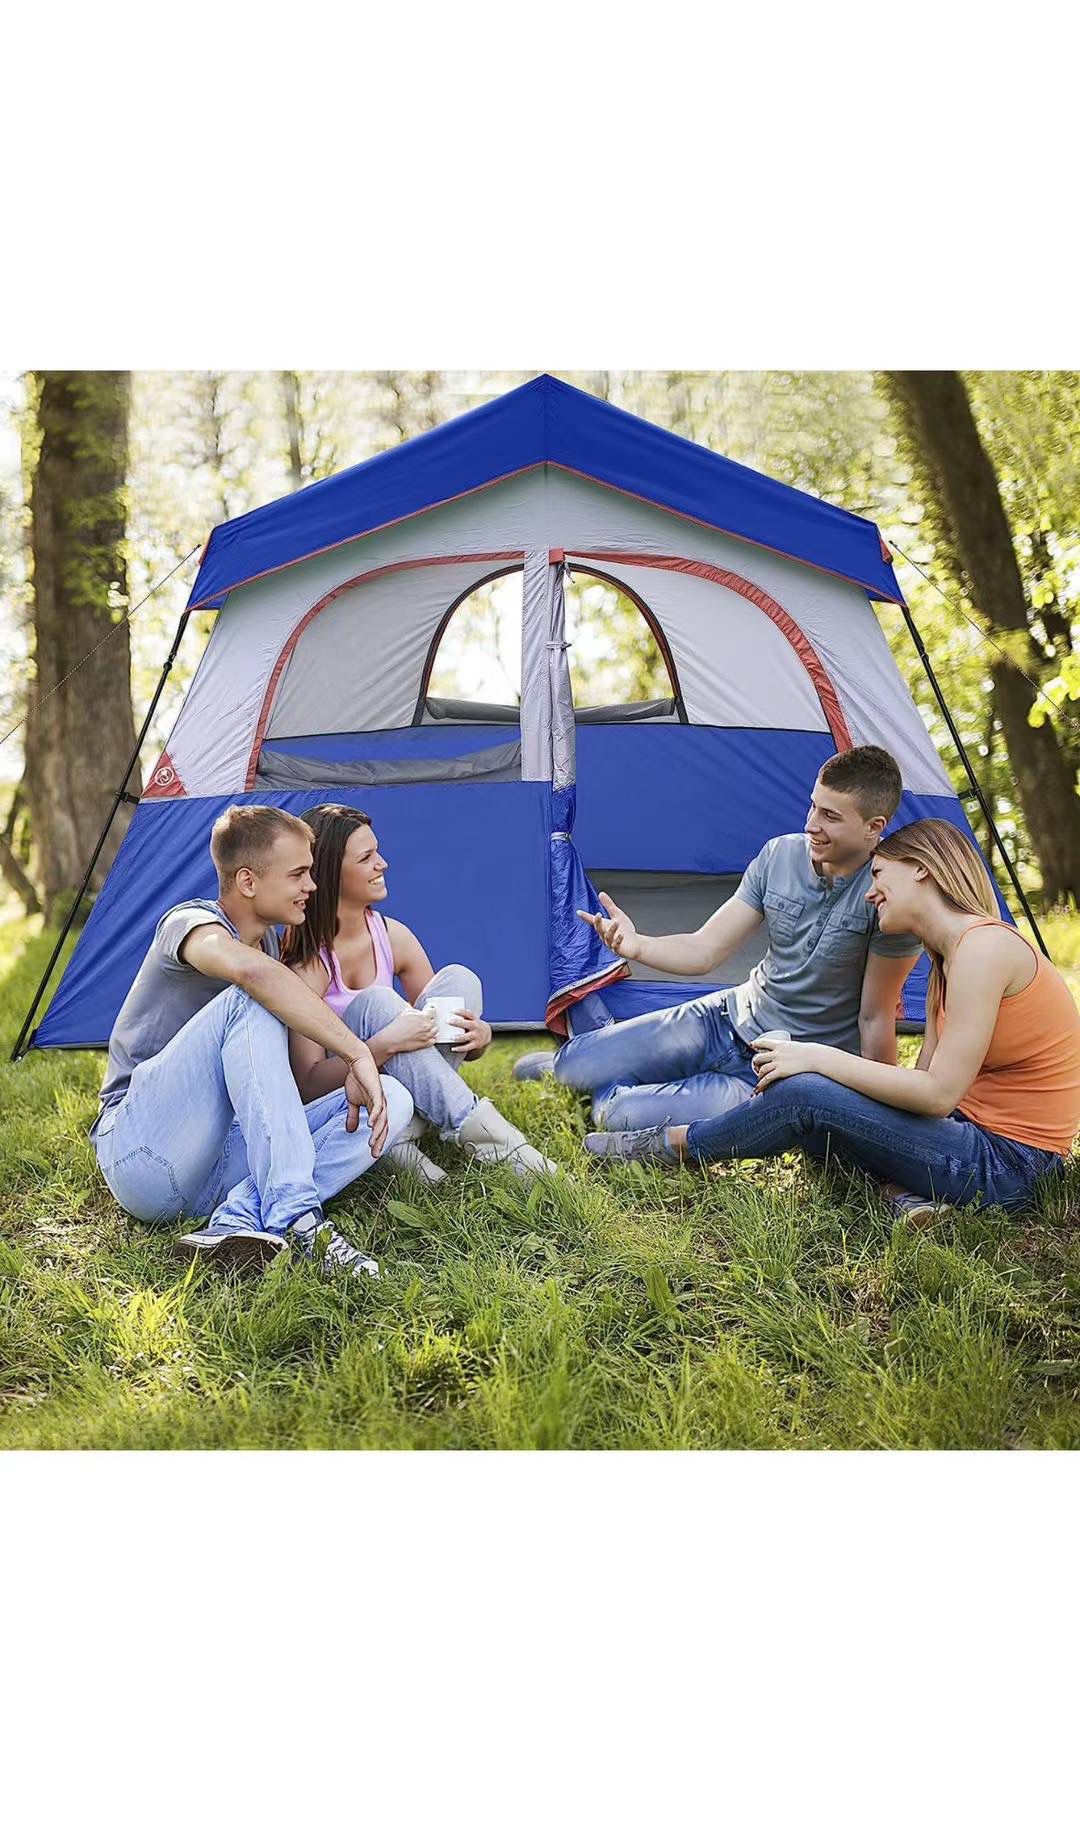 6 Person Camping Tent - Portable Easy Set Up Family Tent for Camp, Windproof Fabric Cabin Tent Outdoor for Hiking, Backpacking, Traveling